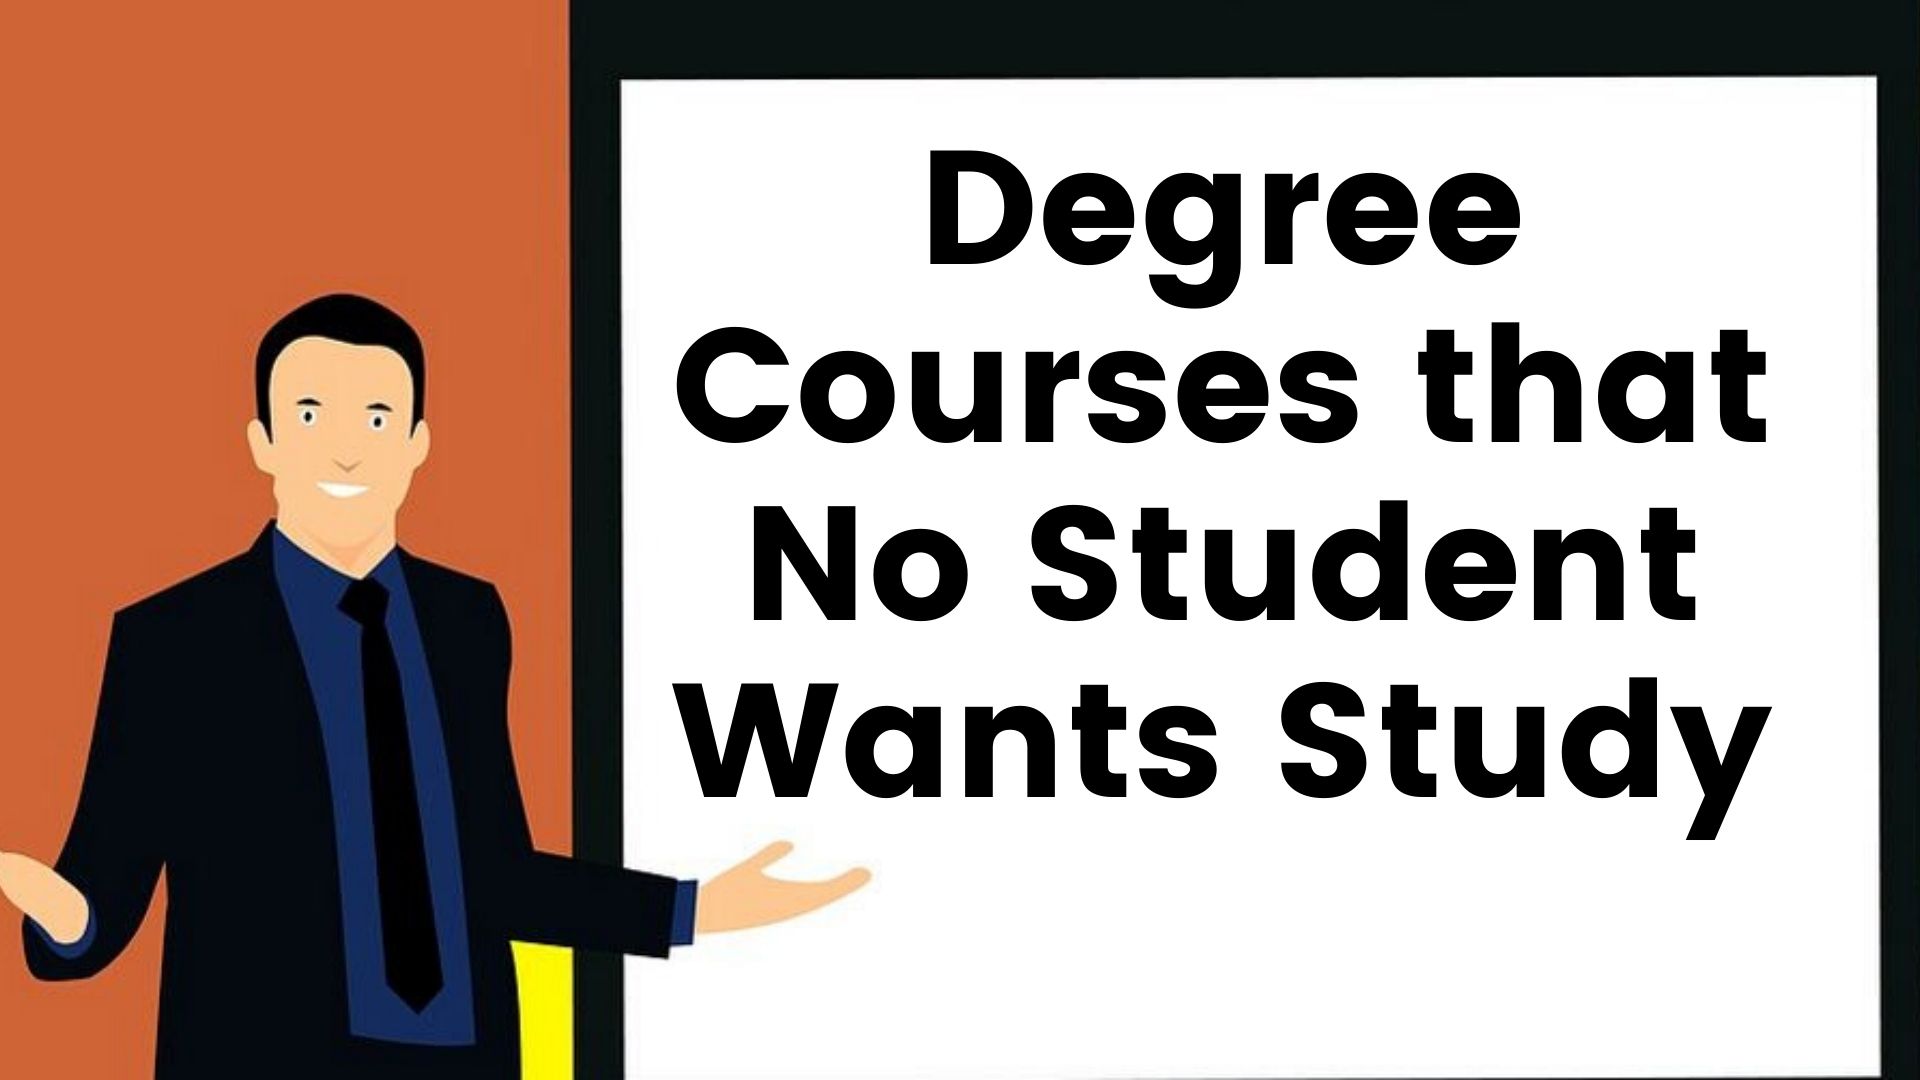 Degree Courses with with less student demand